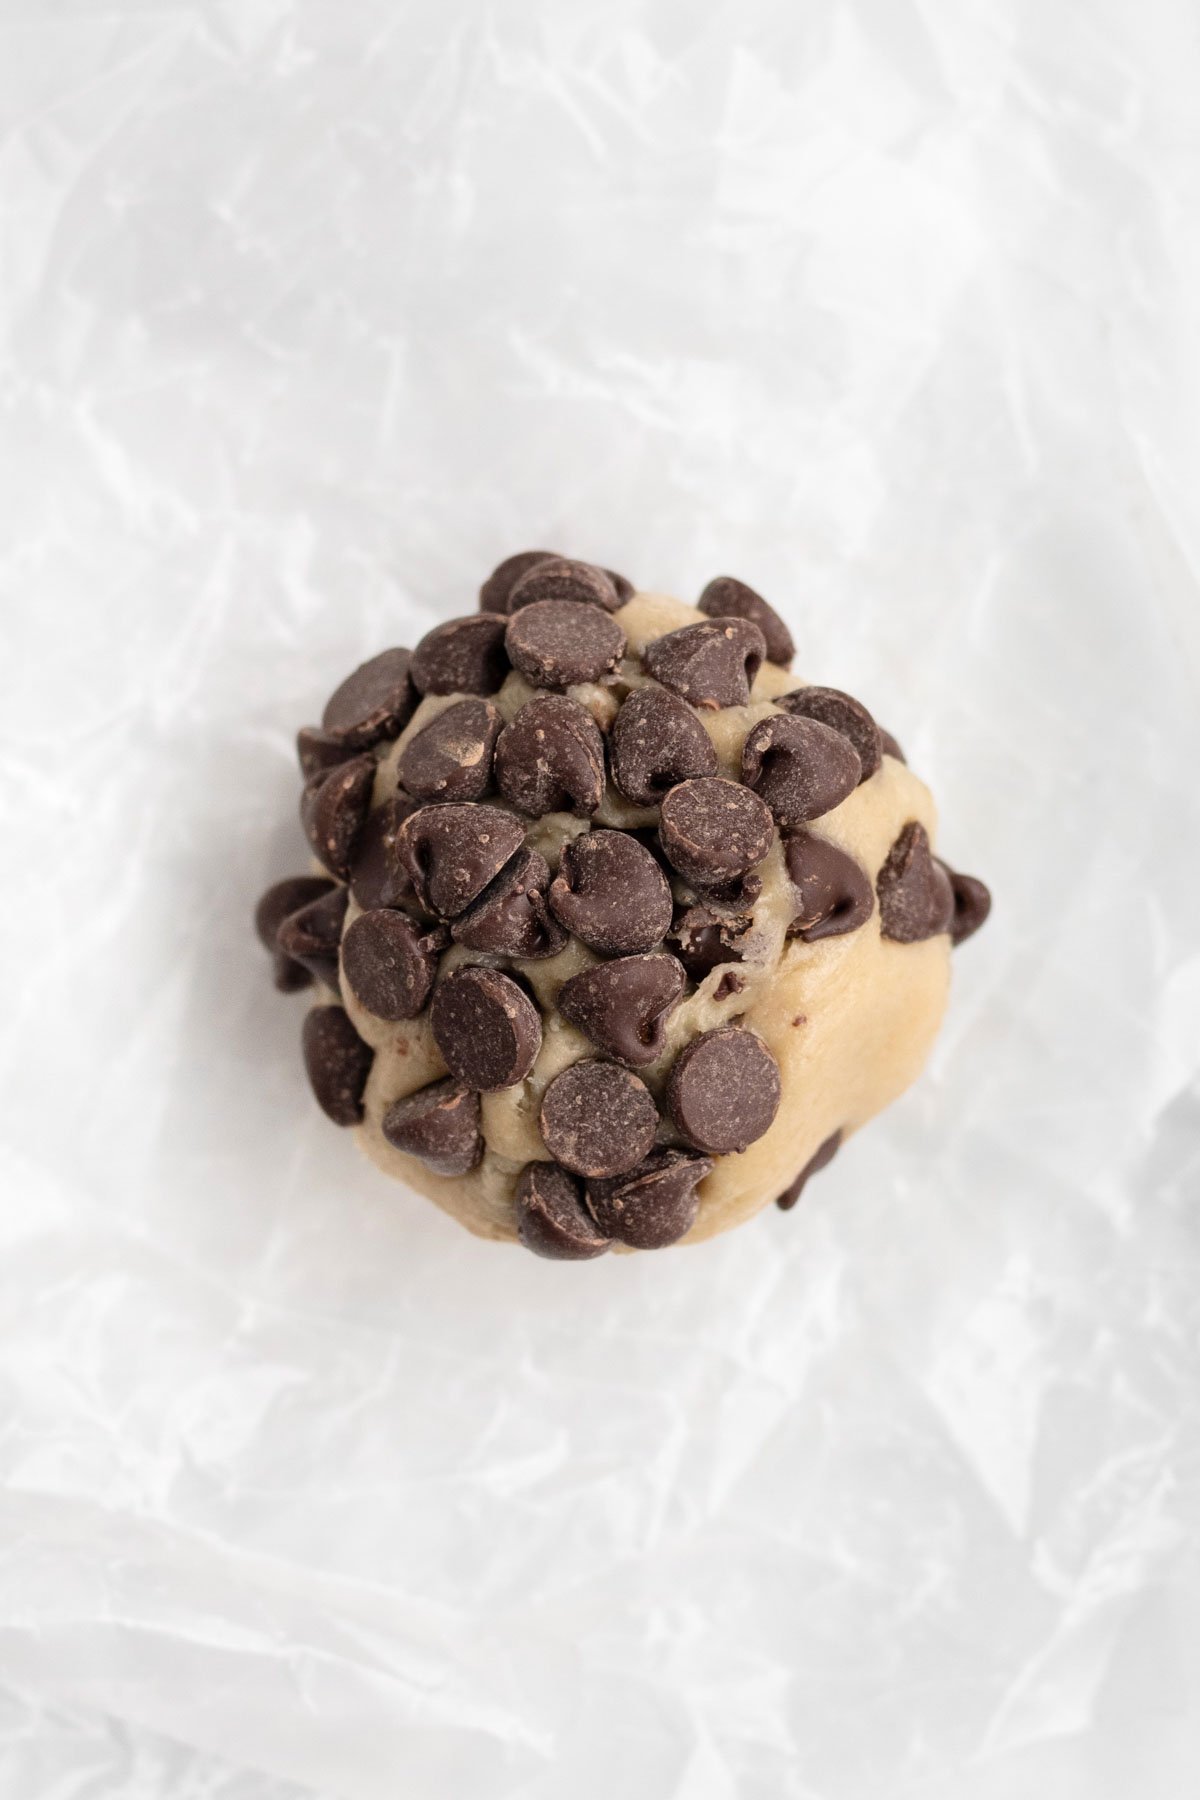 Pressing extra chocolate chips to the top of the cookie dough ball.